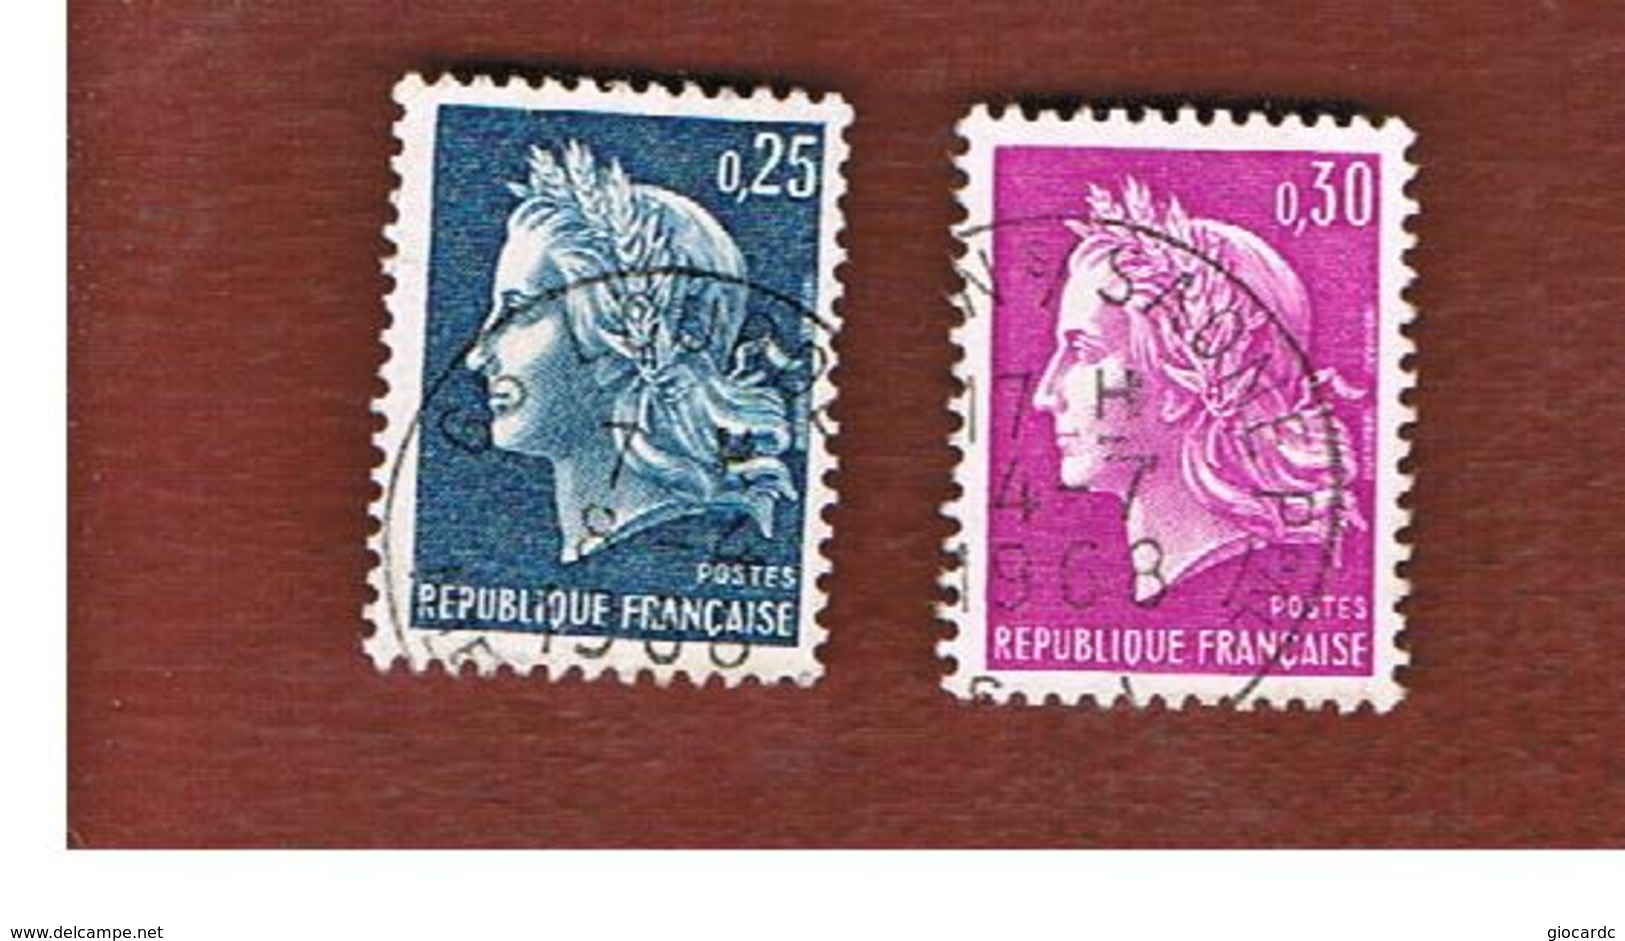 FRANCIA (FRANCE) -   SG 1767.1768  -    1967  MARIANNE: COMPLET SET OF 2    - USED - Usati